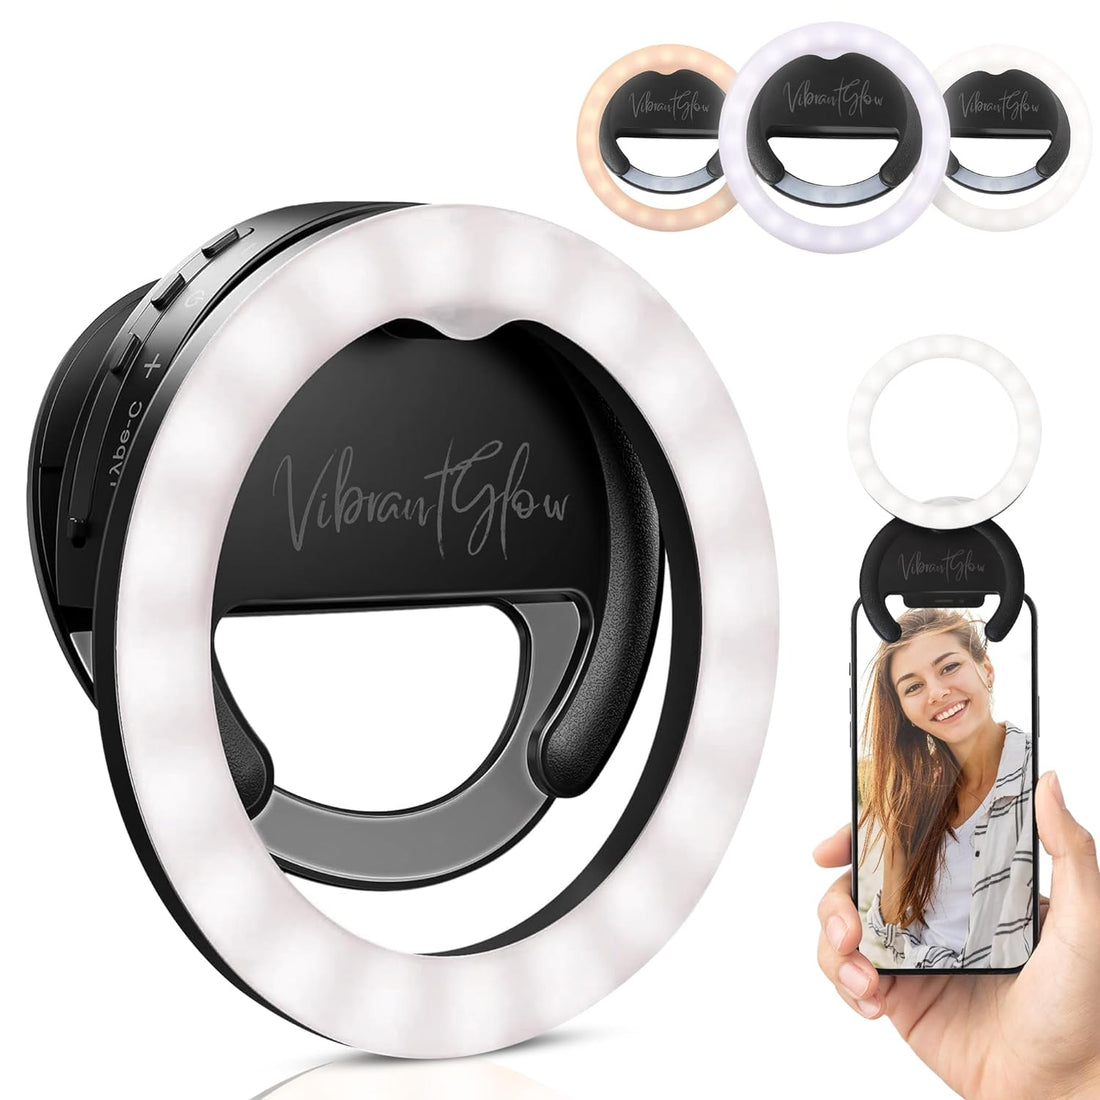 VibrantGlow 3-Mode Dimmable Selfie Ring Light USB-C Rechargeable for Phone/Laptop/Tablet, Screen Visible Clip, Carry Pouch, Great for Live Streaming, Photography, Social Media (Black)